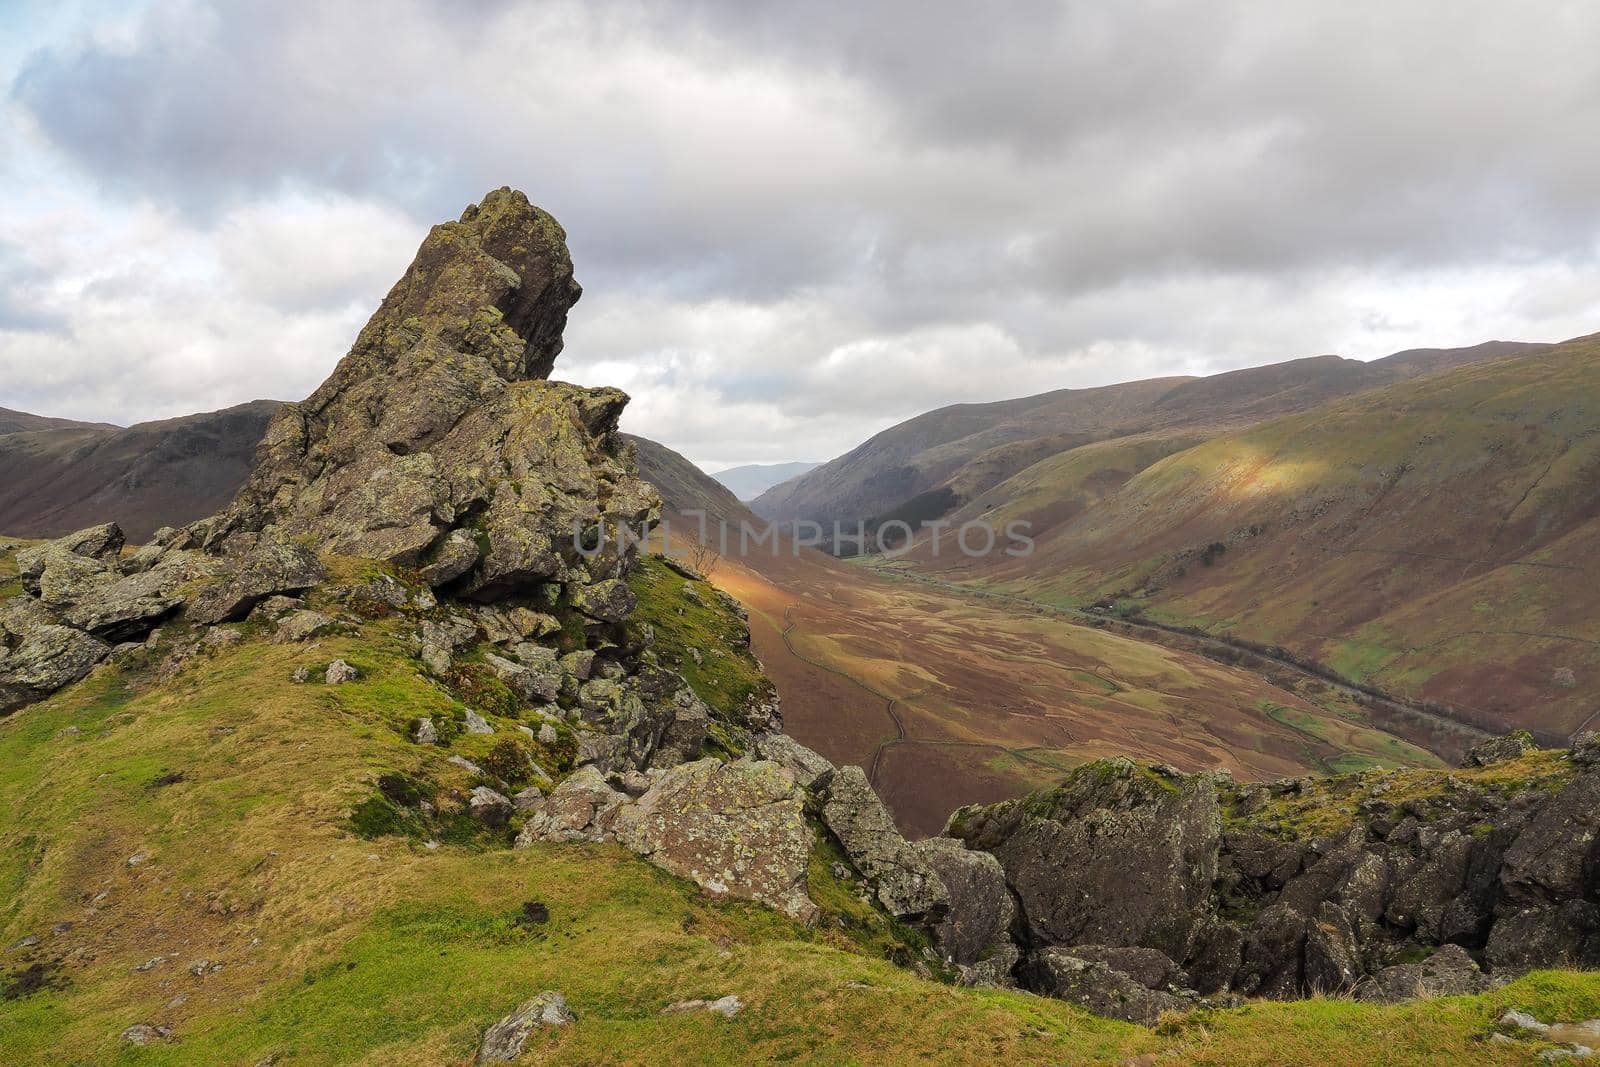 Rock formation 'The Howitzer', Helm Crag, overlooking valley road, Lake District by PhilHarland